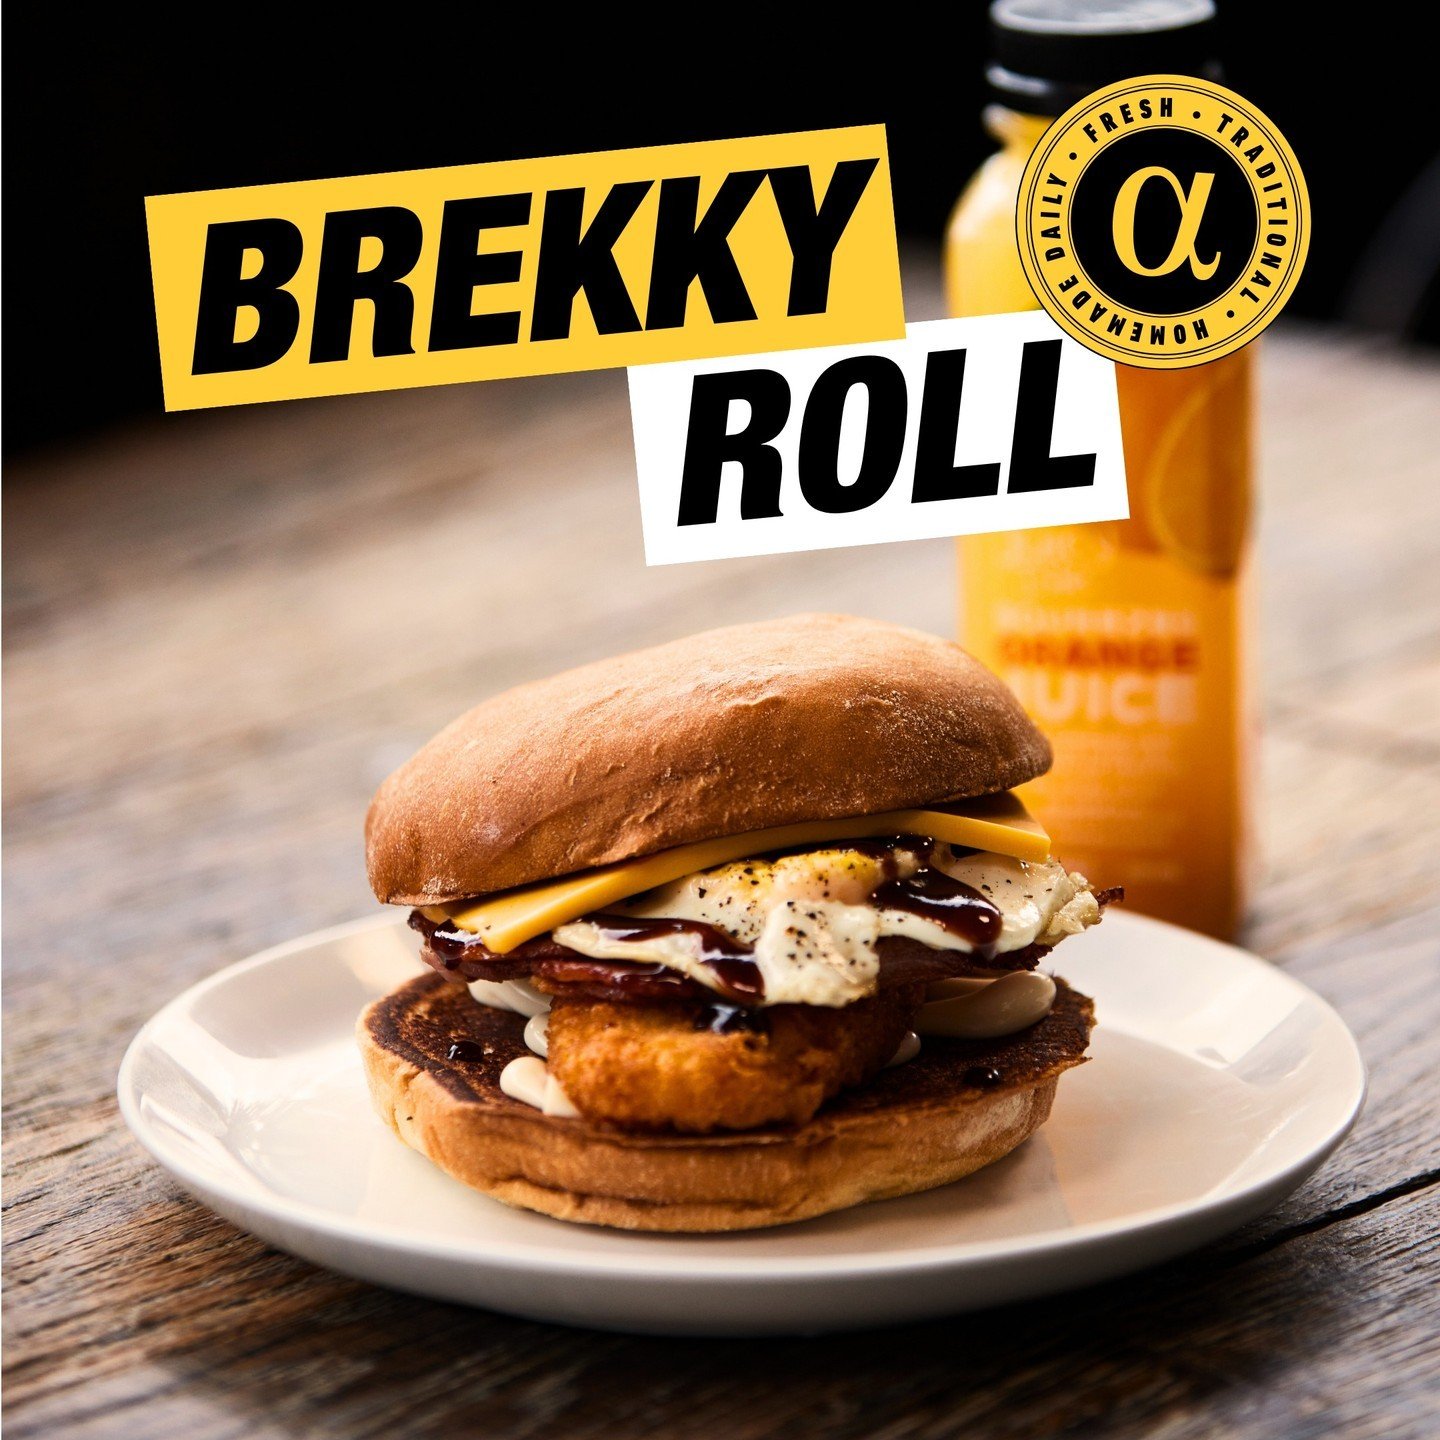 🌅 Rise and grind with our delicious Brekky Roll! The perfect start to your day served with a smile. Bacon, egg, cheese, hashbrown with mayo &amp; BBQ sauce.

#BrekkyRoll #ServiceWithASmile #ChookALiciousBreakfast